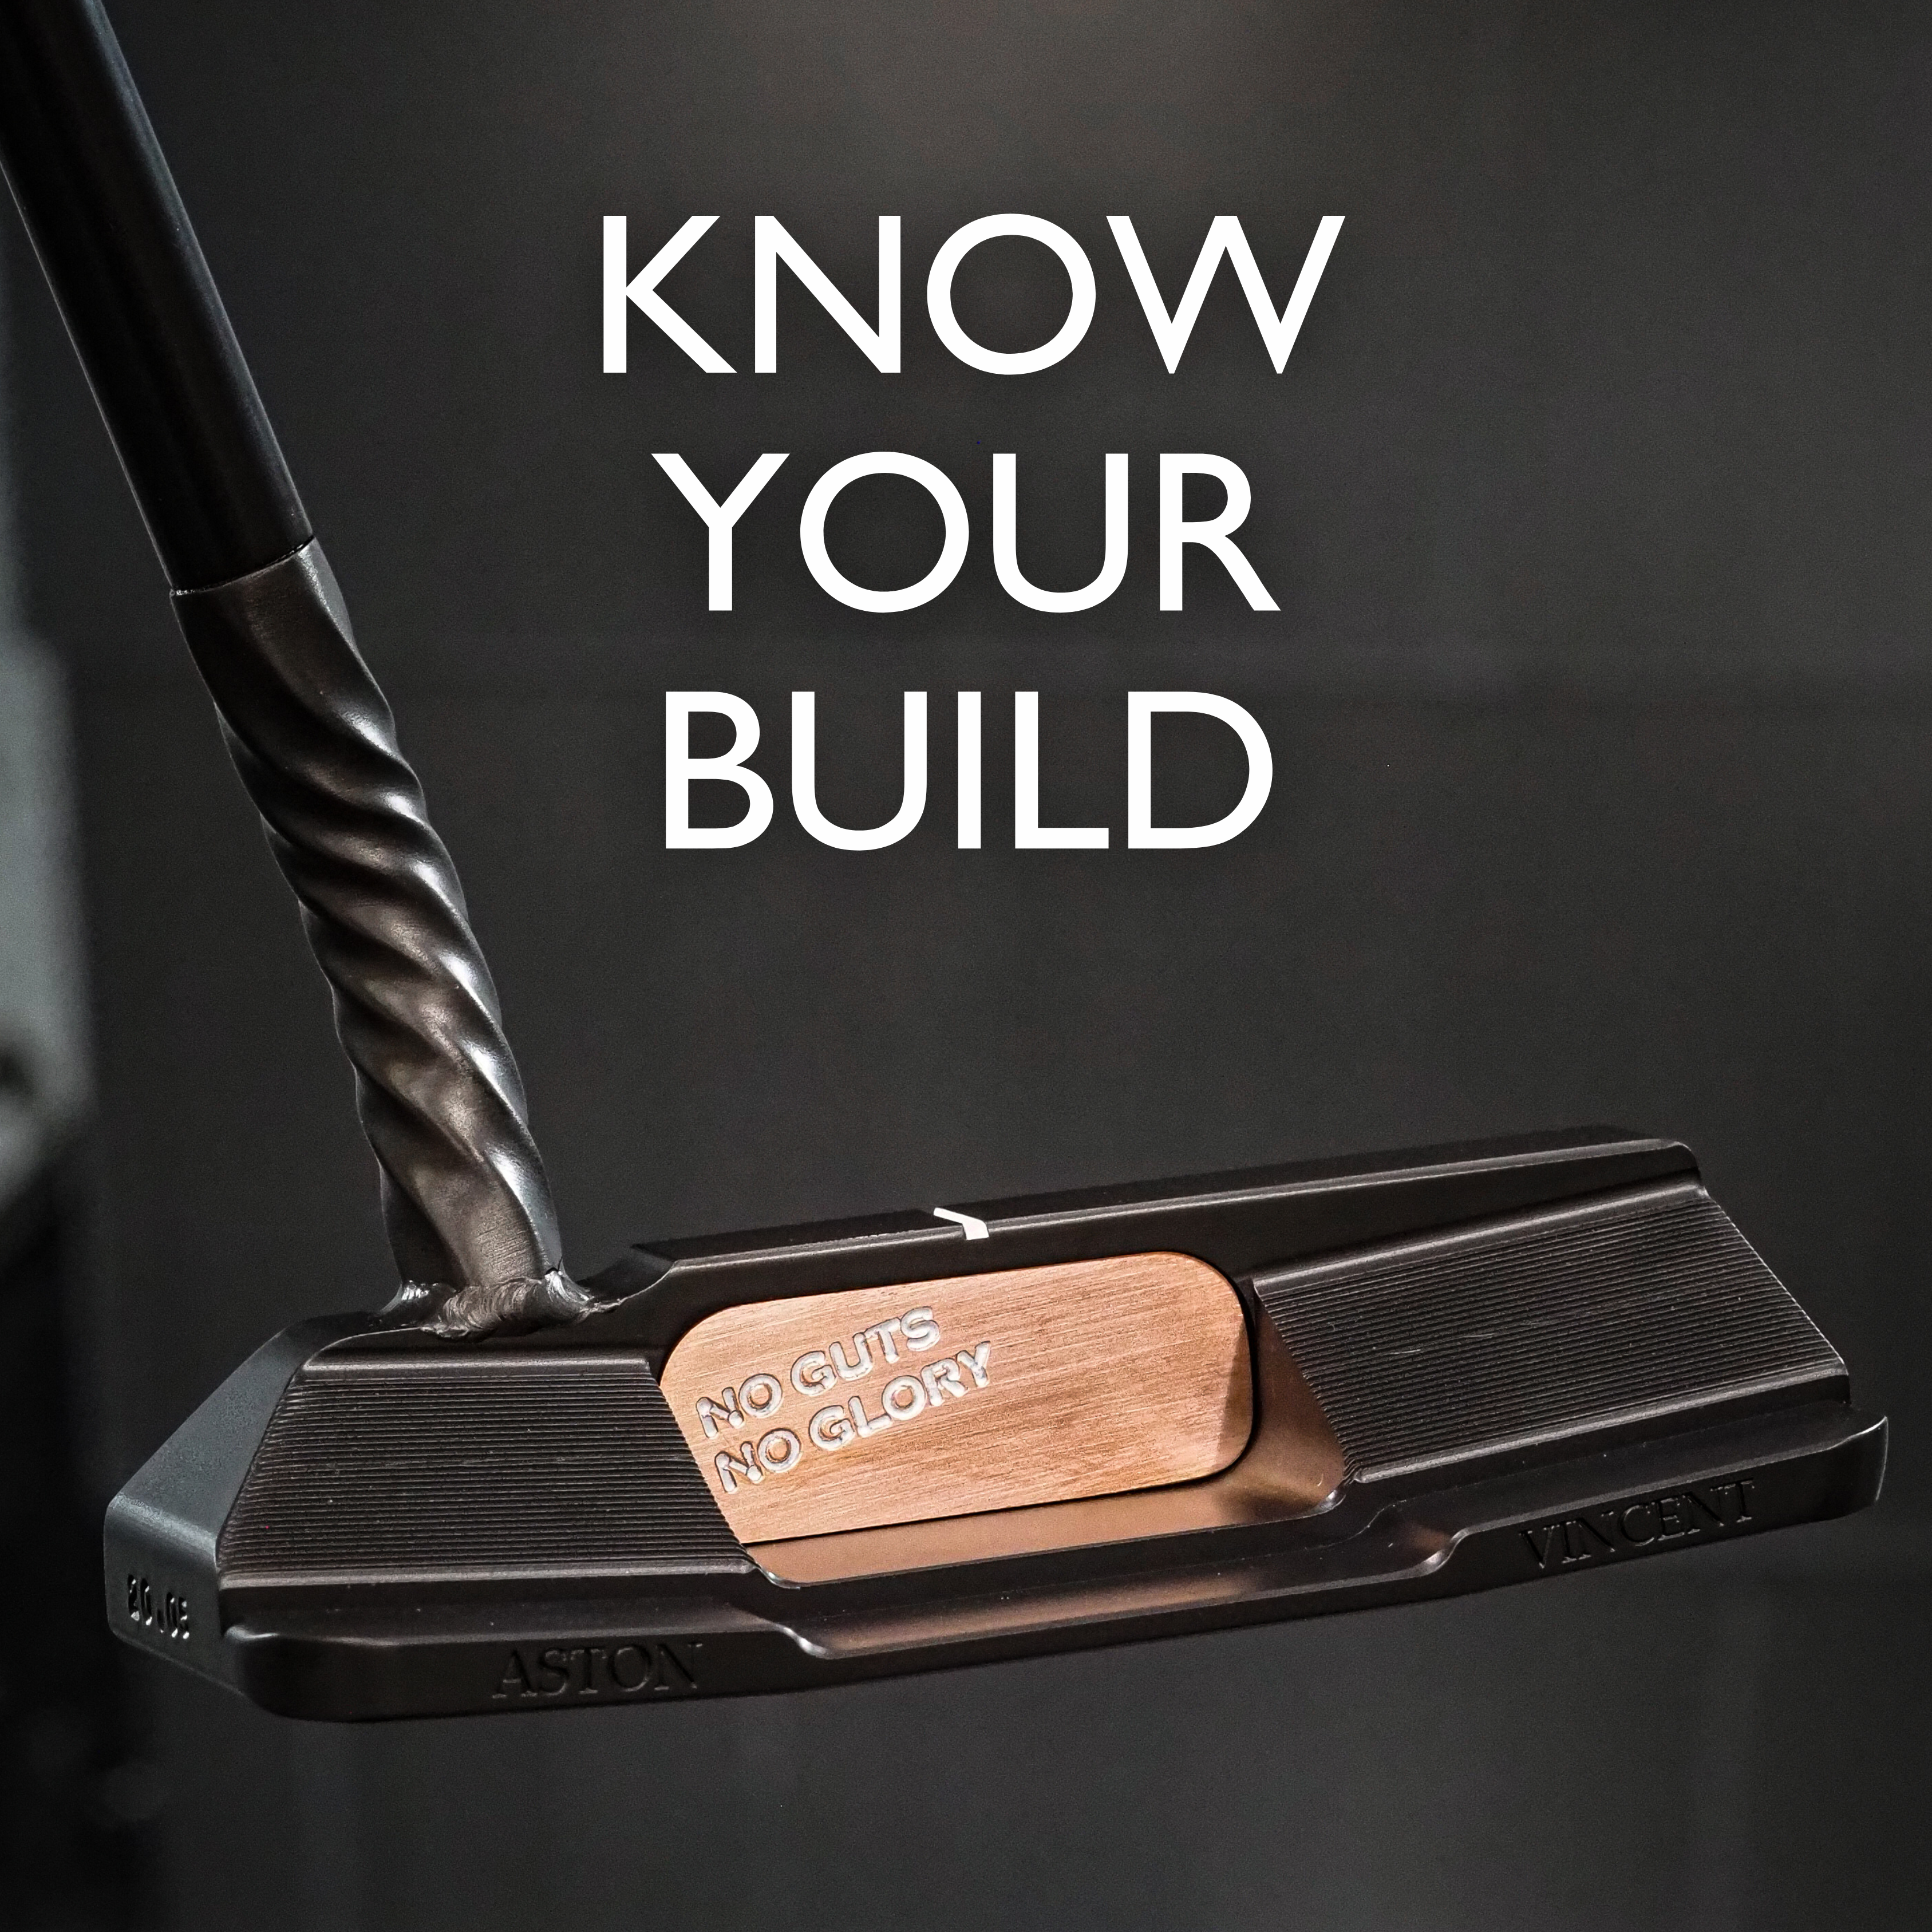 KNOW YOUR BUILD - SINK GOLF